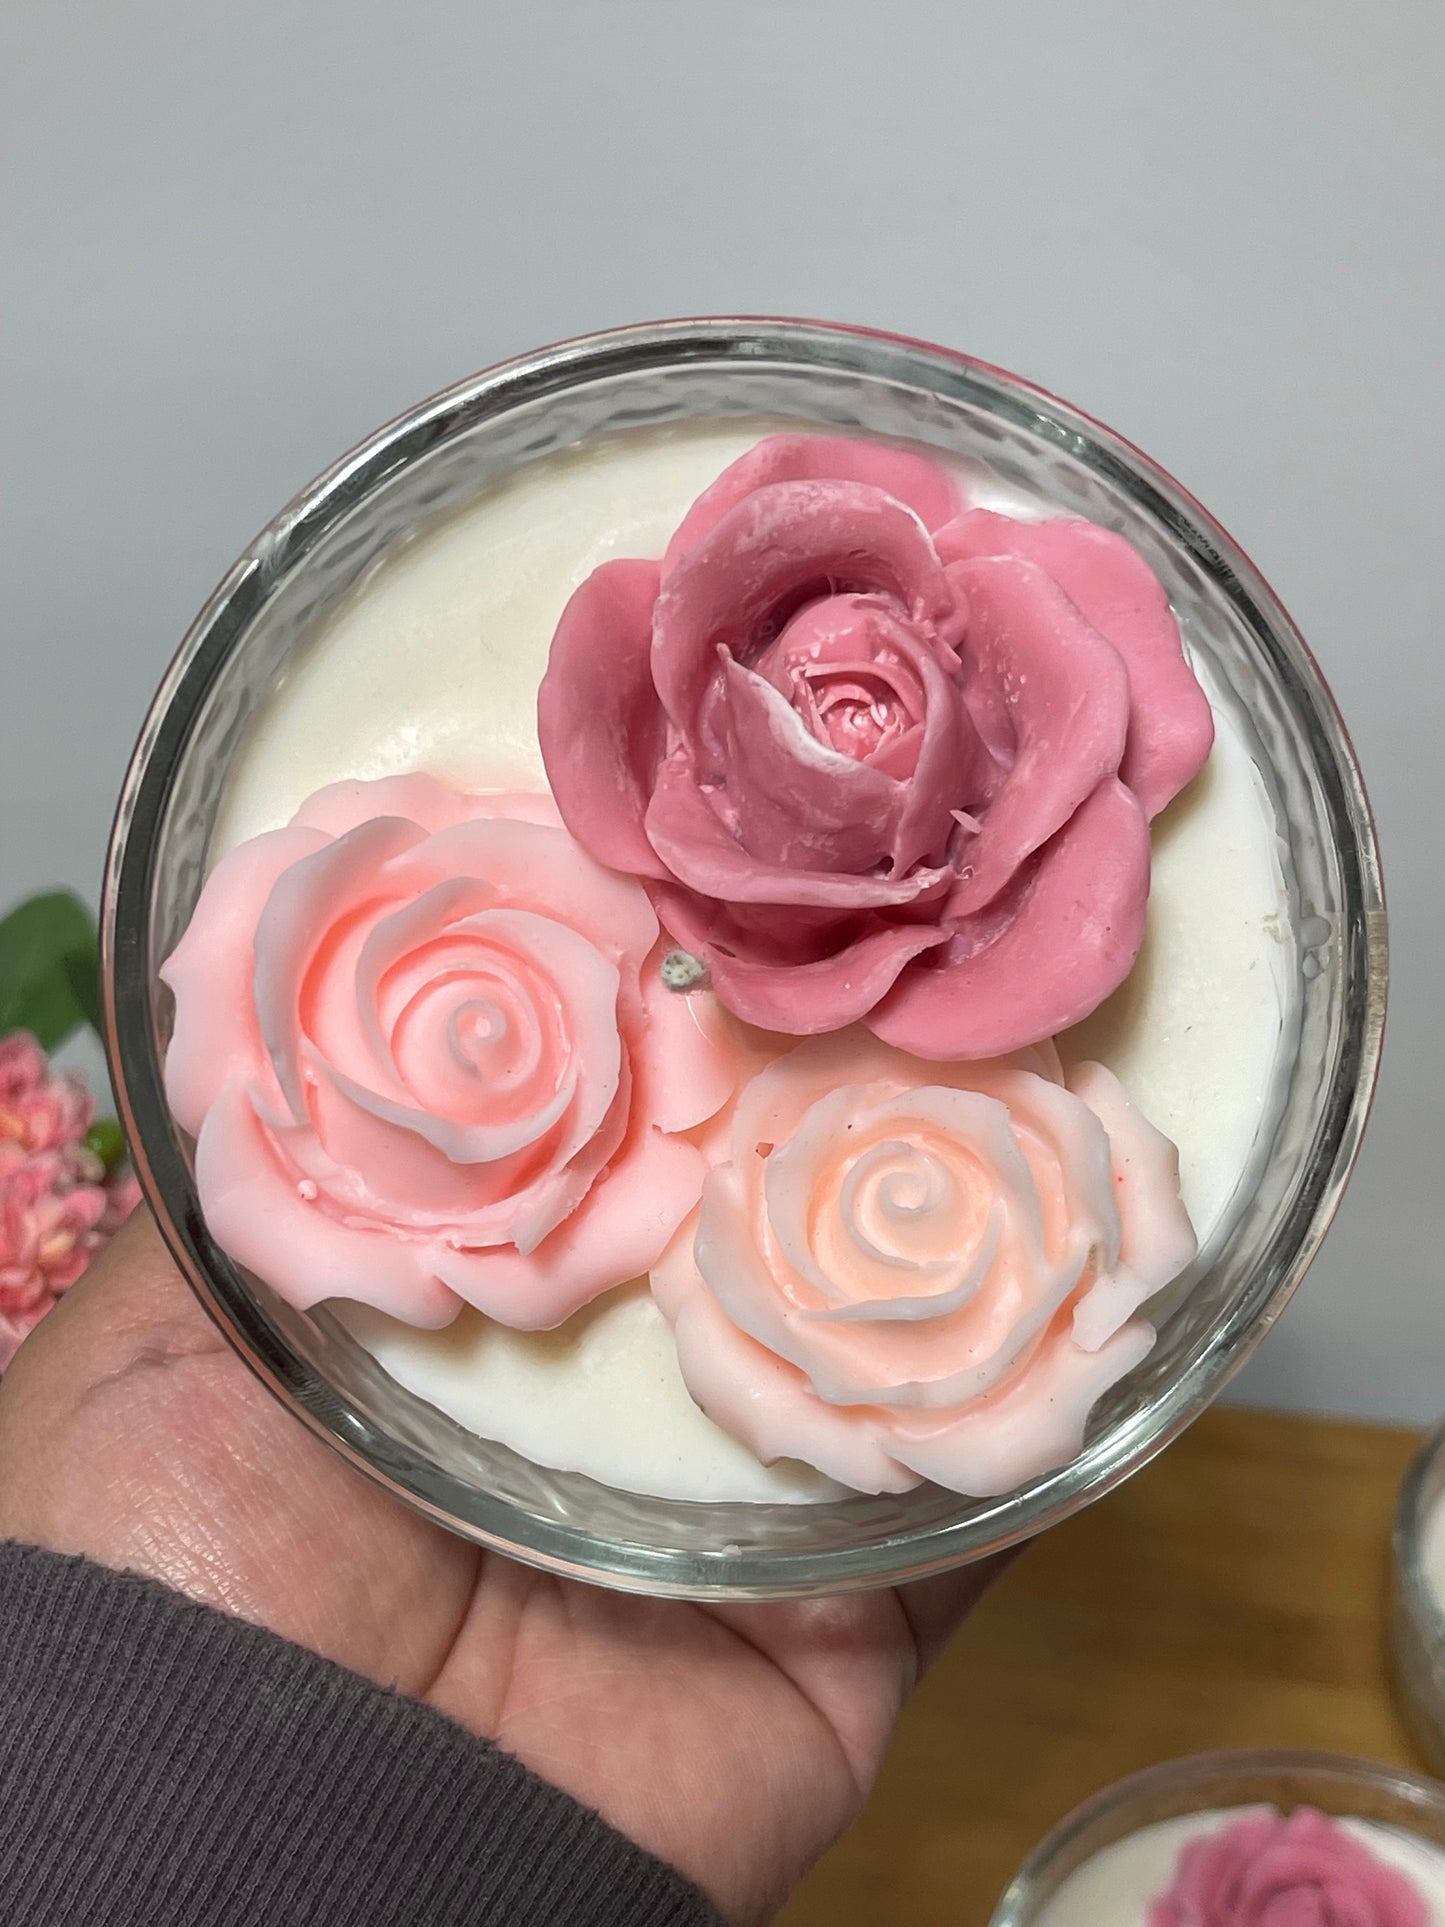 Mother’s Day Sale! Vela rosas y un molcajete/glass bowl unscented candle/roses &molcajete/hand poured soy wax candle/mothers day gift/valentines gift